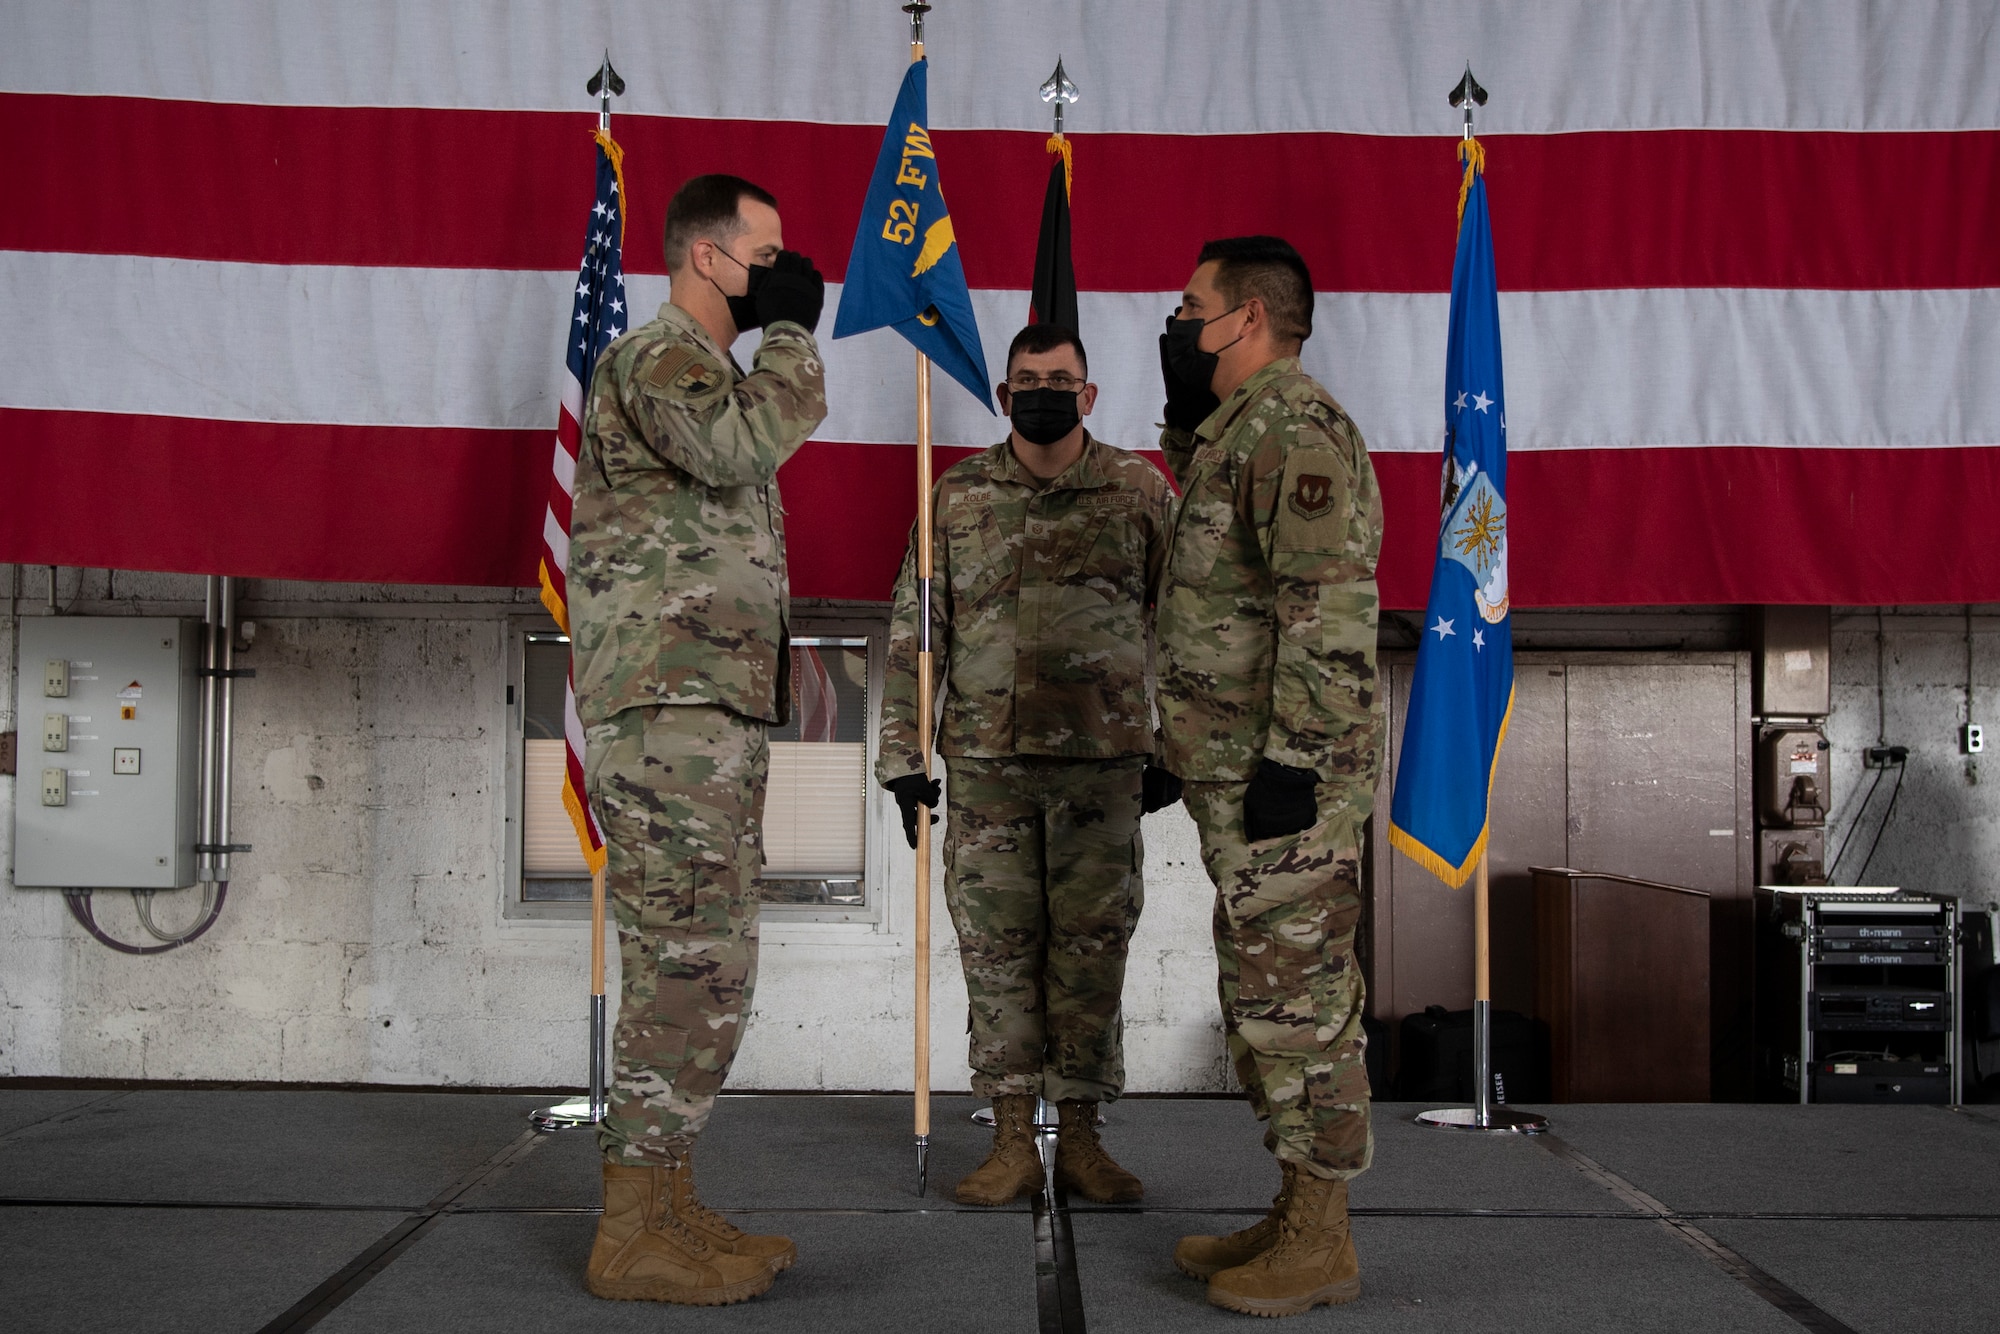 U.S. Air Force Col. James Vinson, 52nd Maintenance Group commander (left), renders a salute to U.S. Air Force Maj. Bryan Beals, 52nd Aircraft Maintenance Squadron’s incoming commander, during the 52nd AMXS assumption of command ceremony, July 6, 2021, on Spangdahlem Air Base, Germany. The 52nd AMXS provides mission-capable aircraft for the 480th Fighter Squadron through safe and professional maintenance and are responsible for the servicing, inspecting, maintaining, launching, and recovering every assigned F-16 Fighting Falcon aircraft. (U.S. Air Force photo by Staff Sgt. Melody W. Howley)